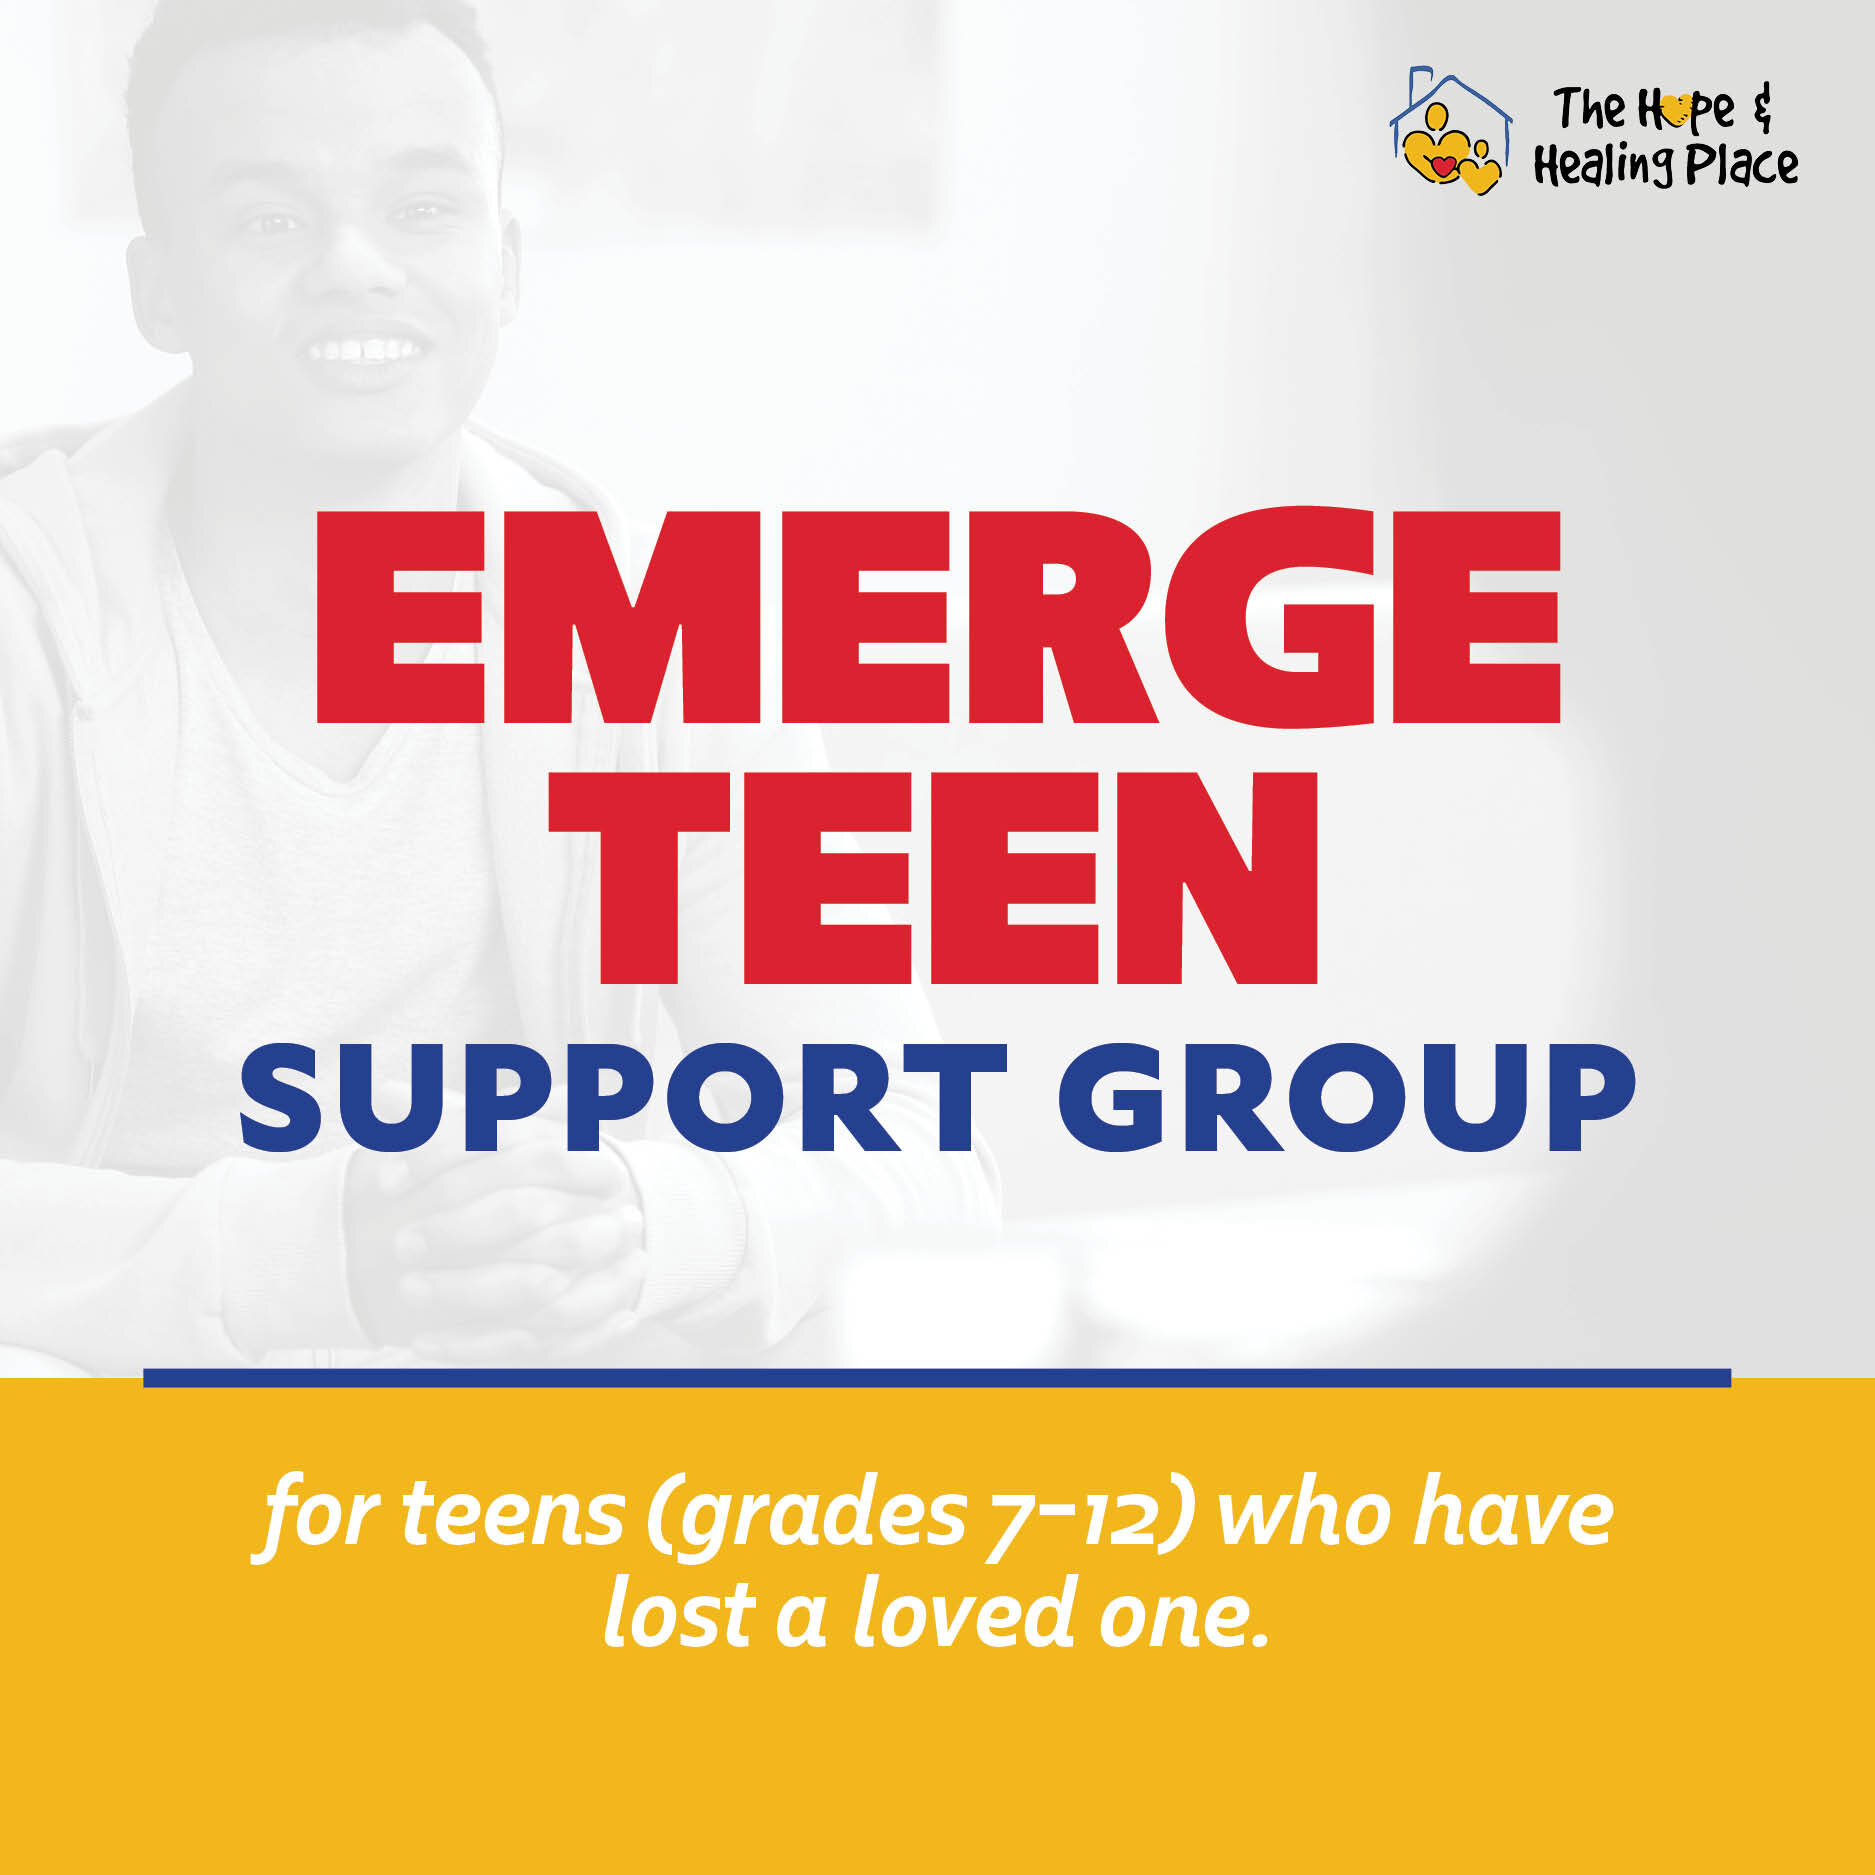 Growing up is tough enough for teens... but much tougher for those who are going through the loss of a loved one. So, we created Emerge - a support group just for teens (grades 7-12) who have lost a loved one. 

Whether it be the loss of a friend or 